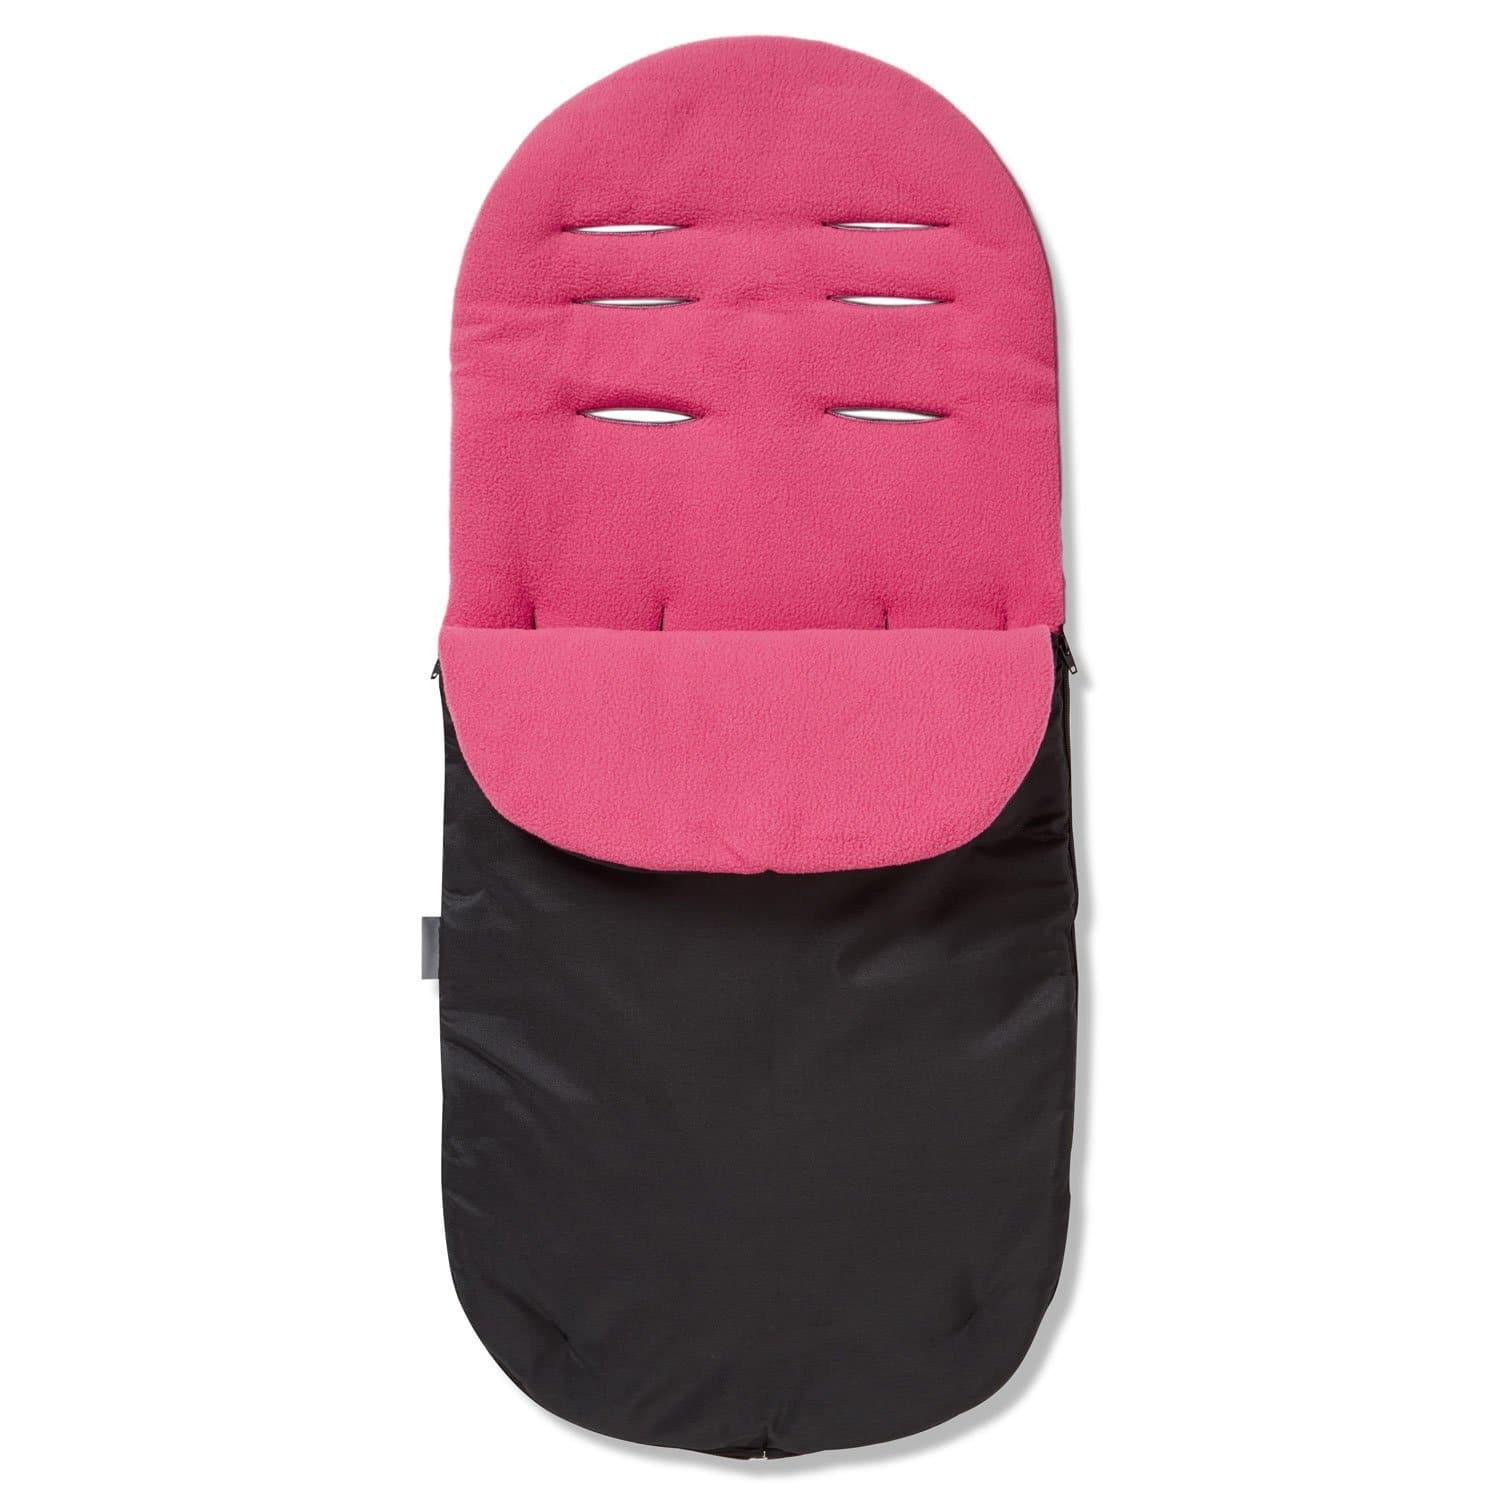 Footmuff / Cosy Toes Compatible with Phil & Teds - Dark Pink / Fits All Models | For Your Little One